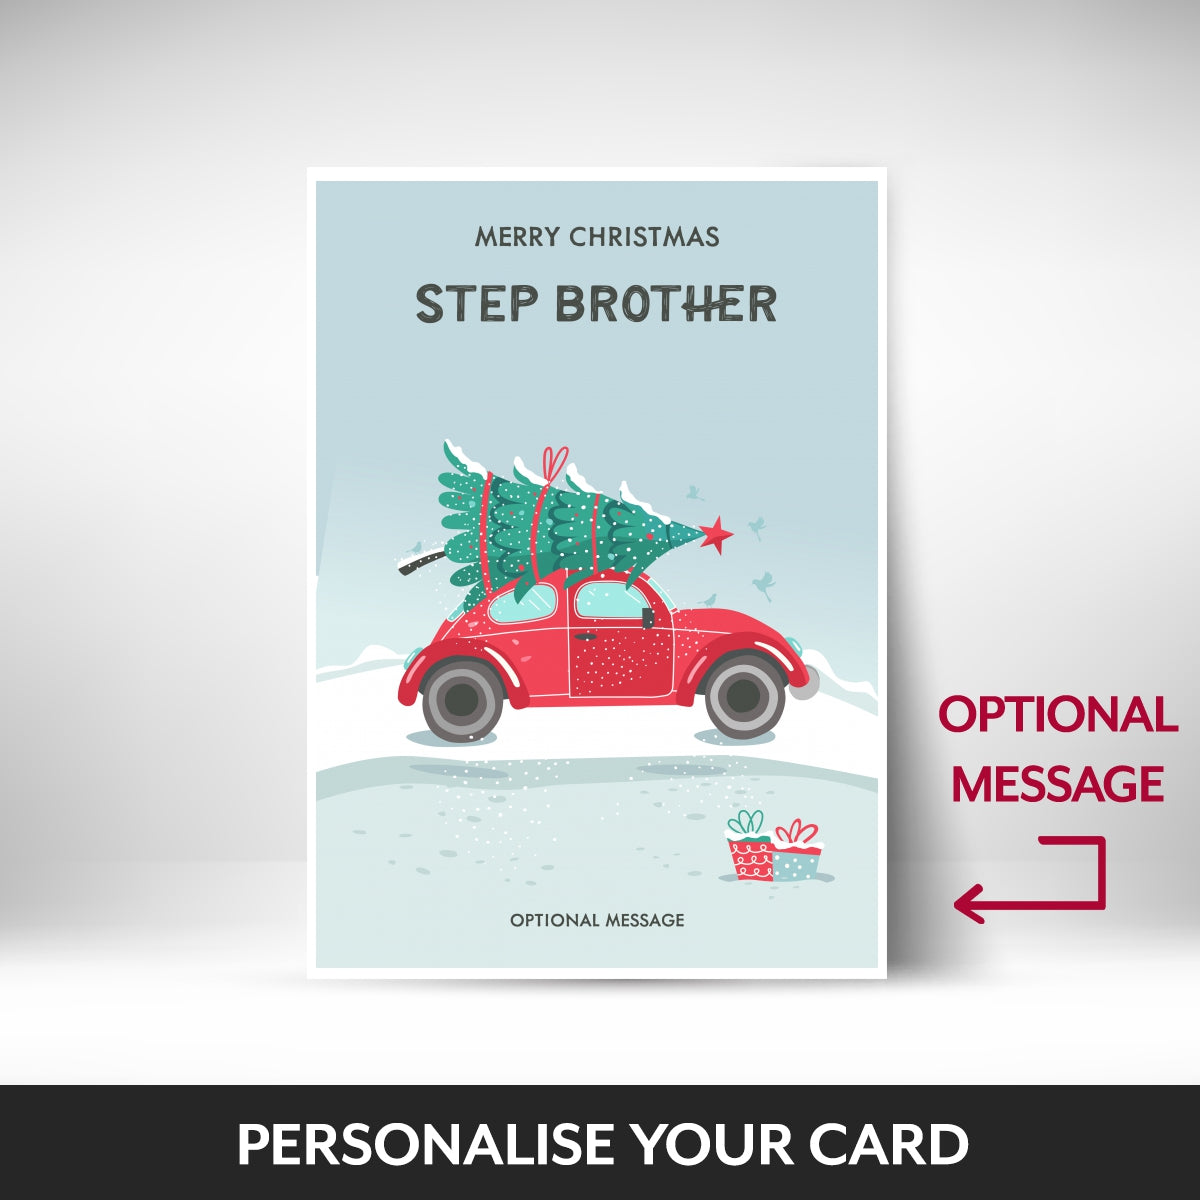 What can be personalised on this step brother christmas cards